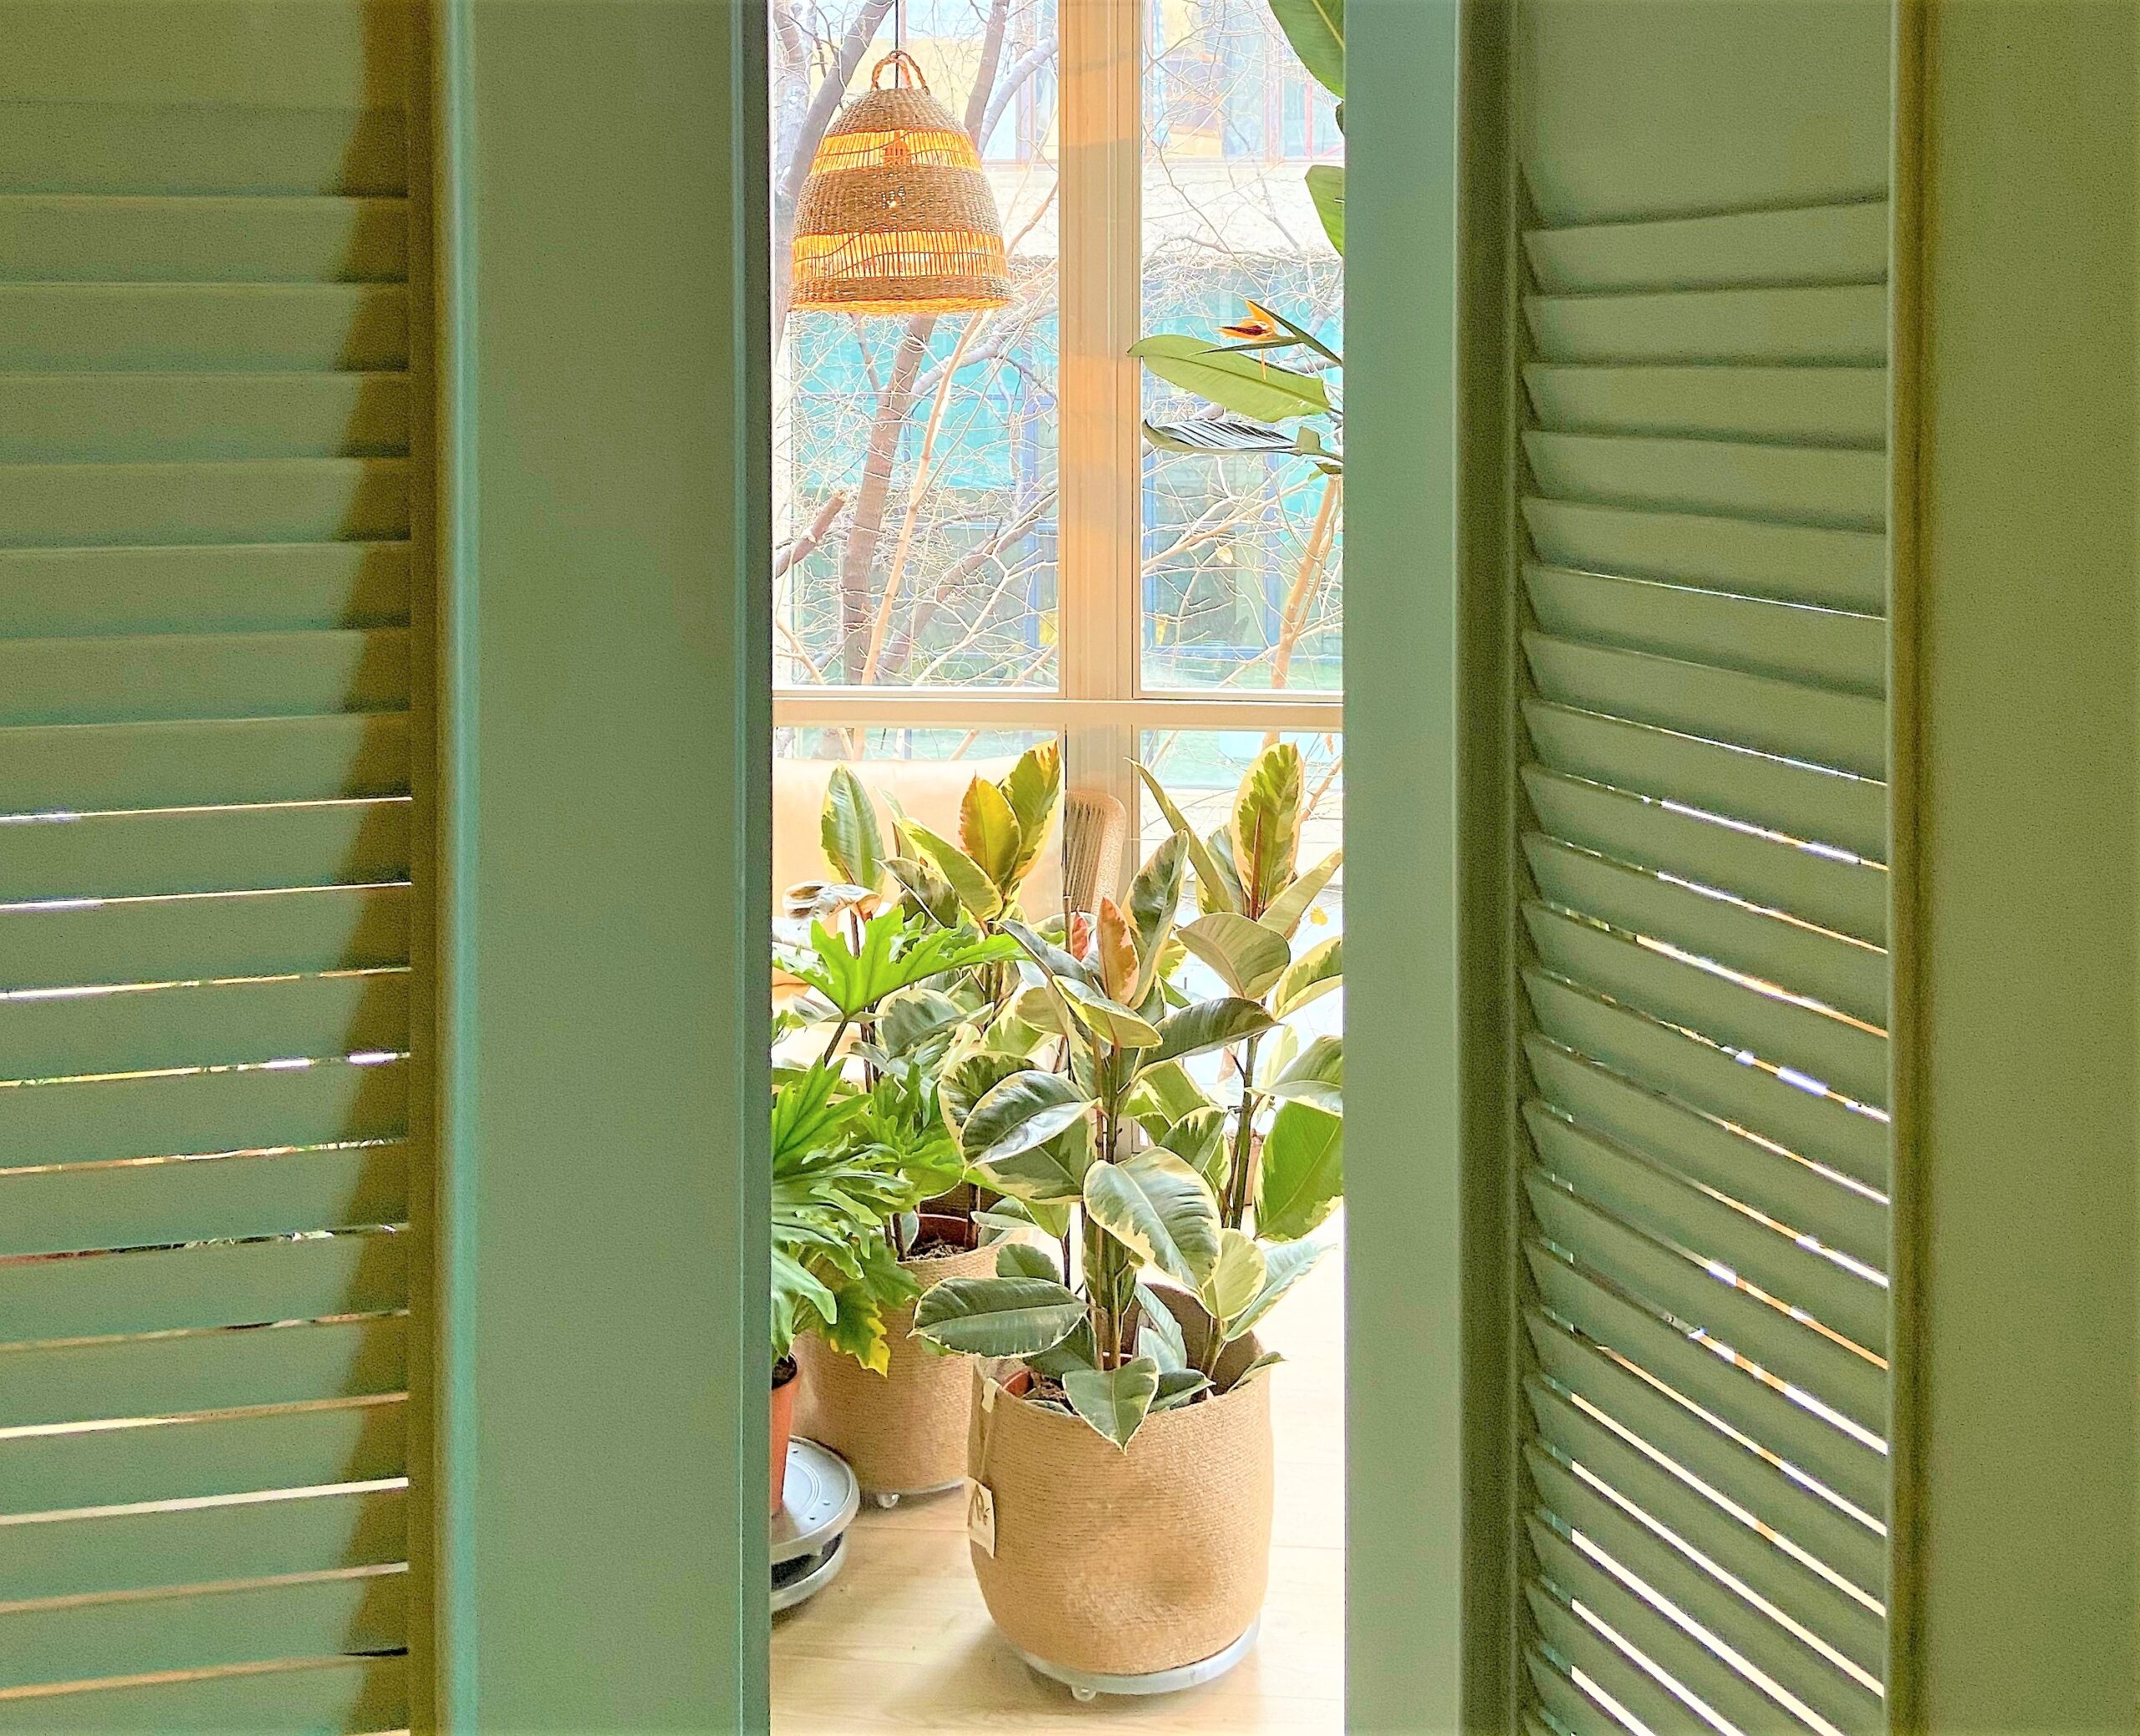 Through a set of green opened doors we can see a bright living space with tall tropicals bathed with sunlight.